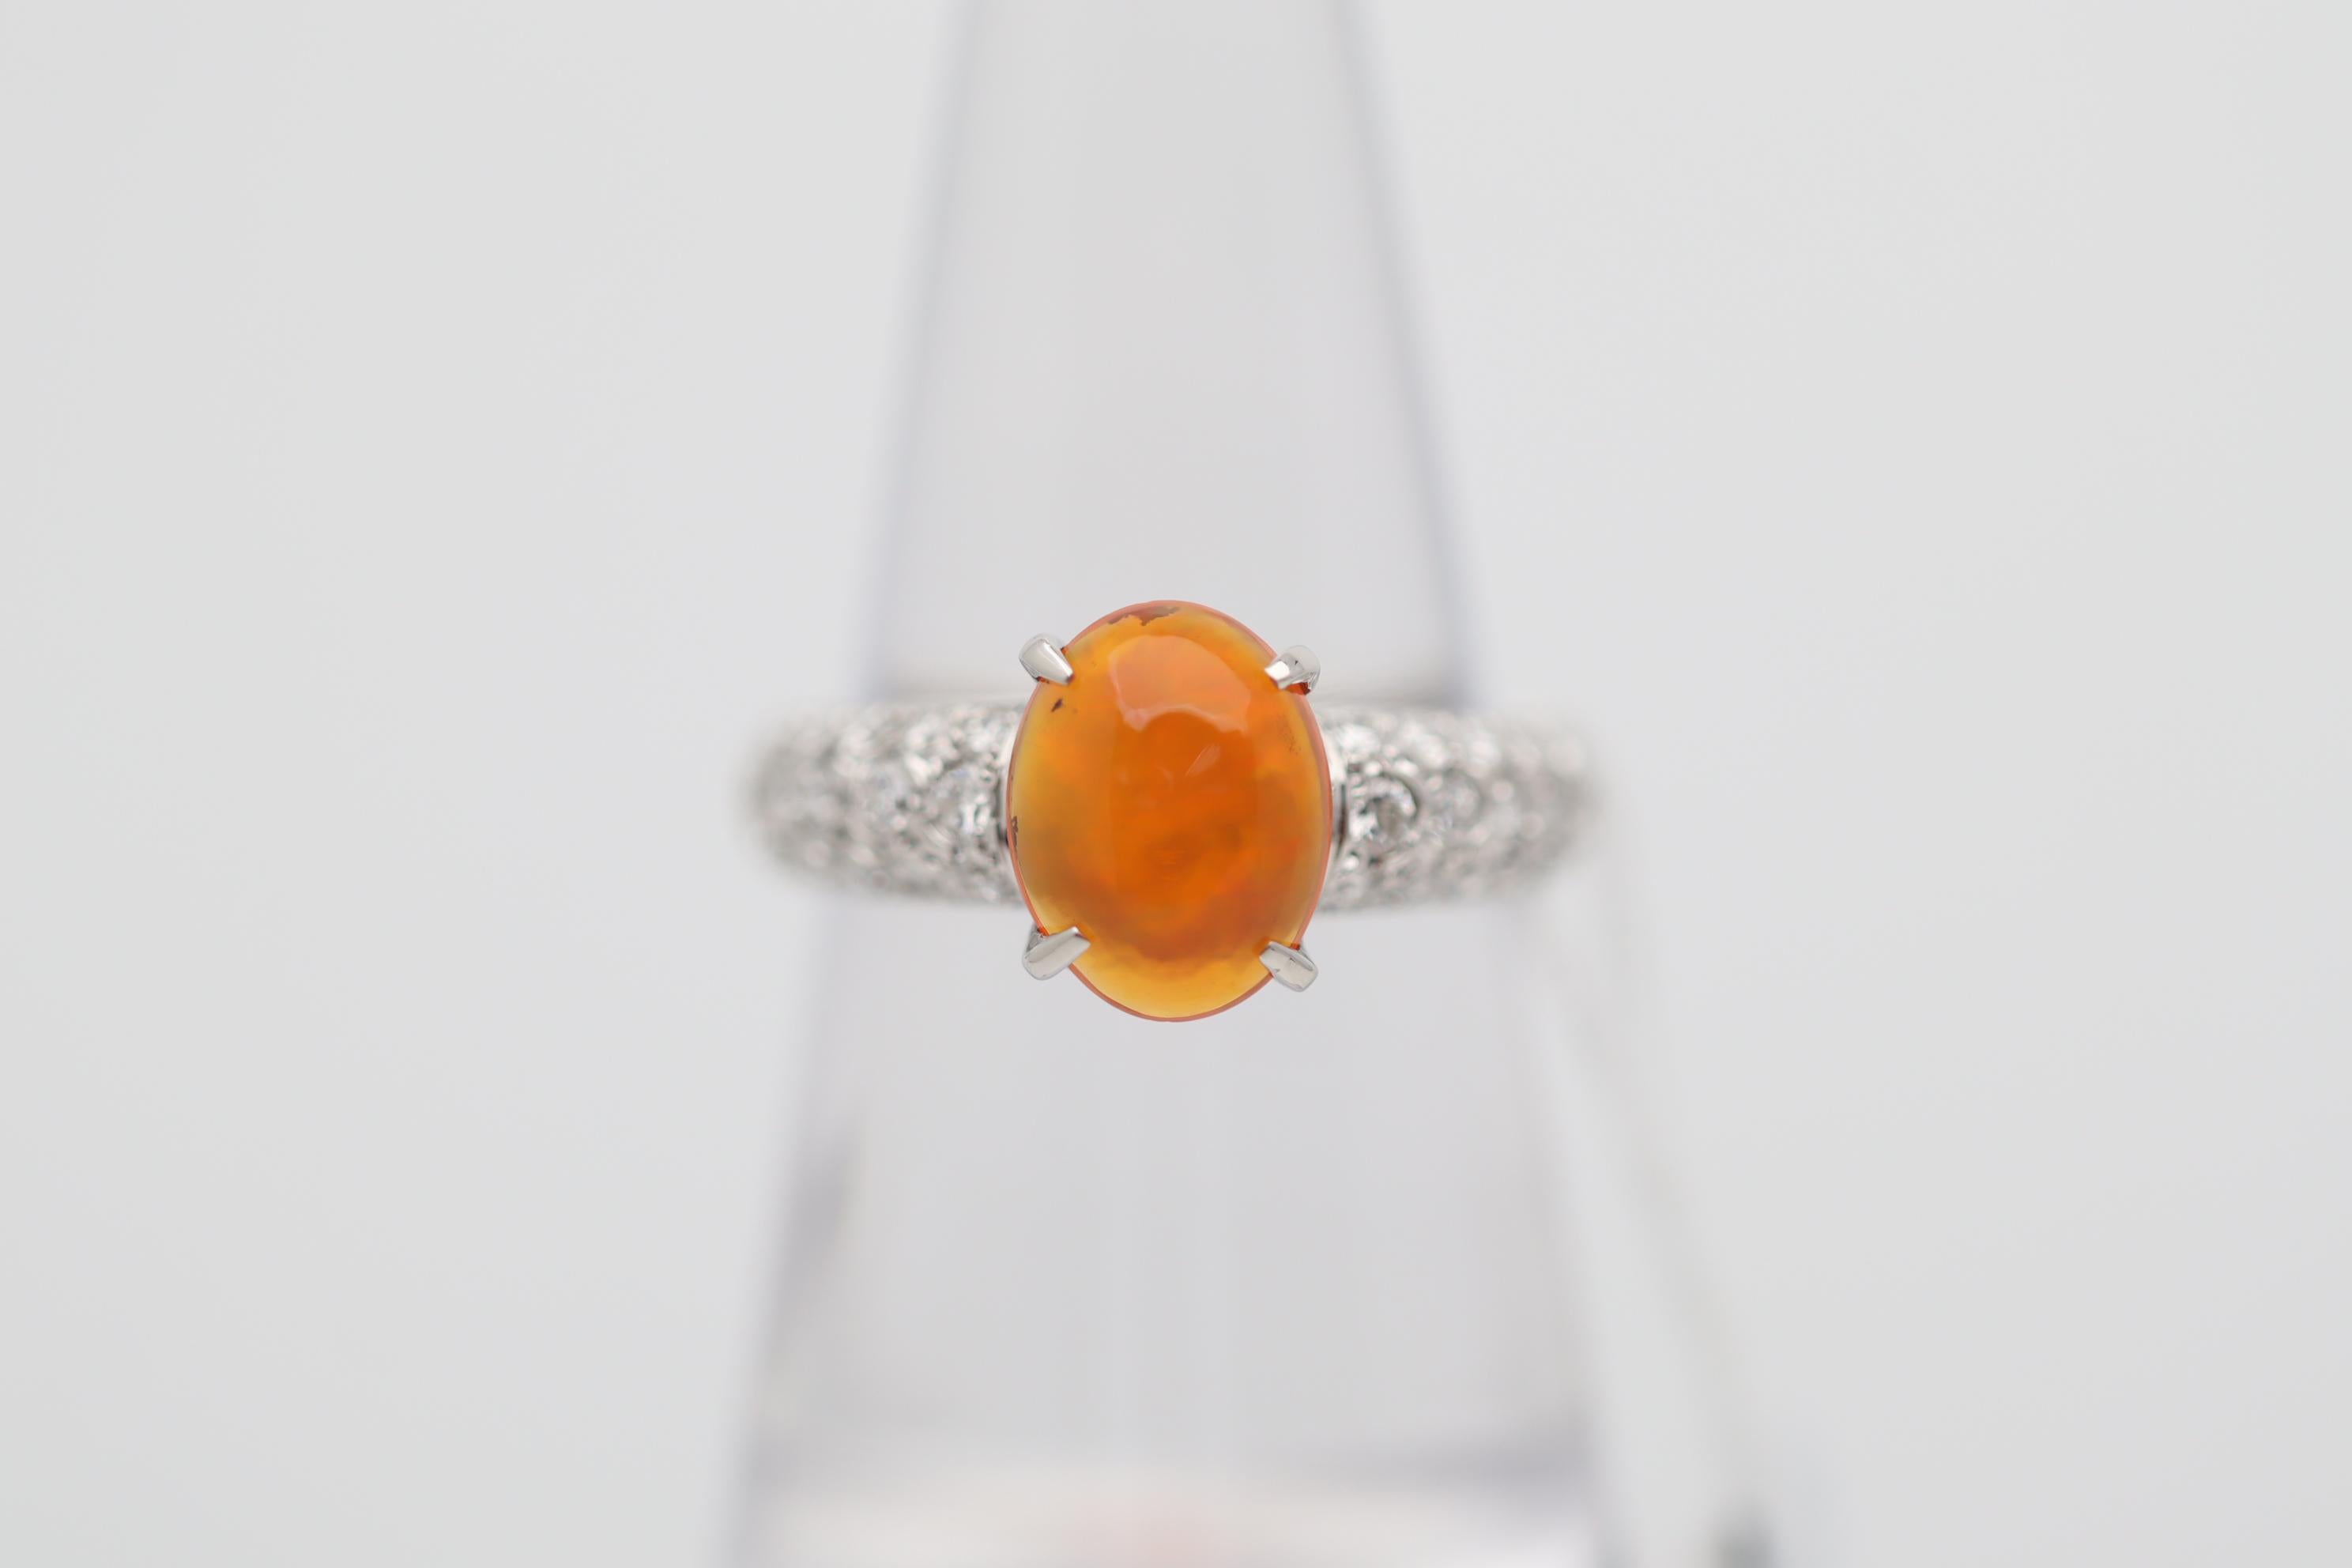 A very fine Mexican fire opal takes center stage of this platinum ring. The opal weighs 1.38 carats and has the ideal intense jelly orange color which is so desired. Adding to that the opal has great play of color as flashes of reds and oranges run